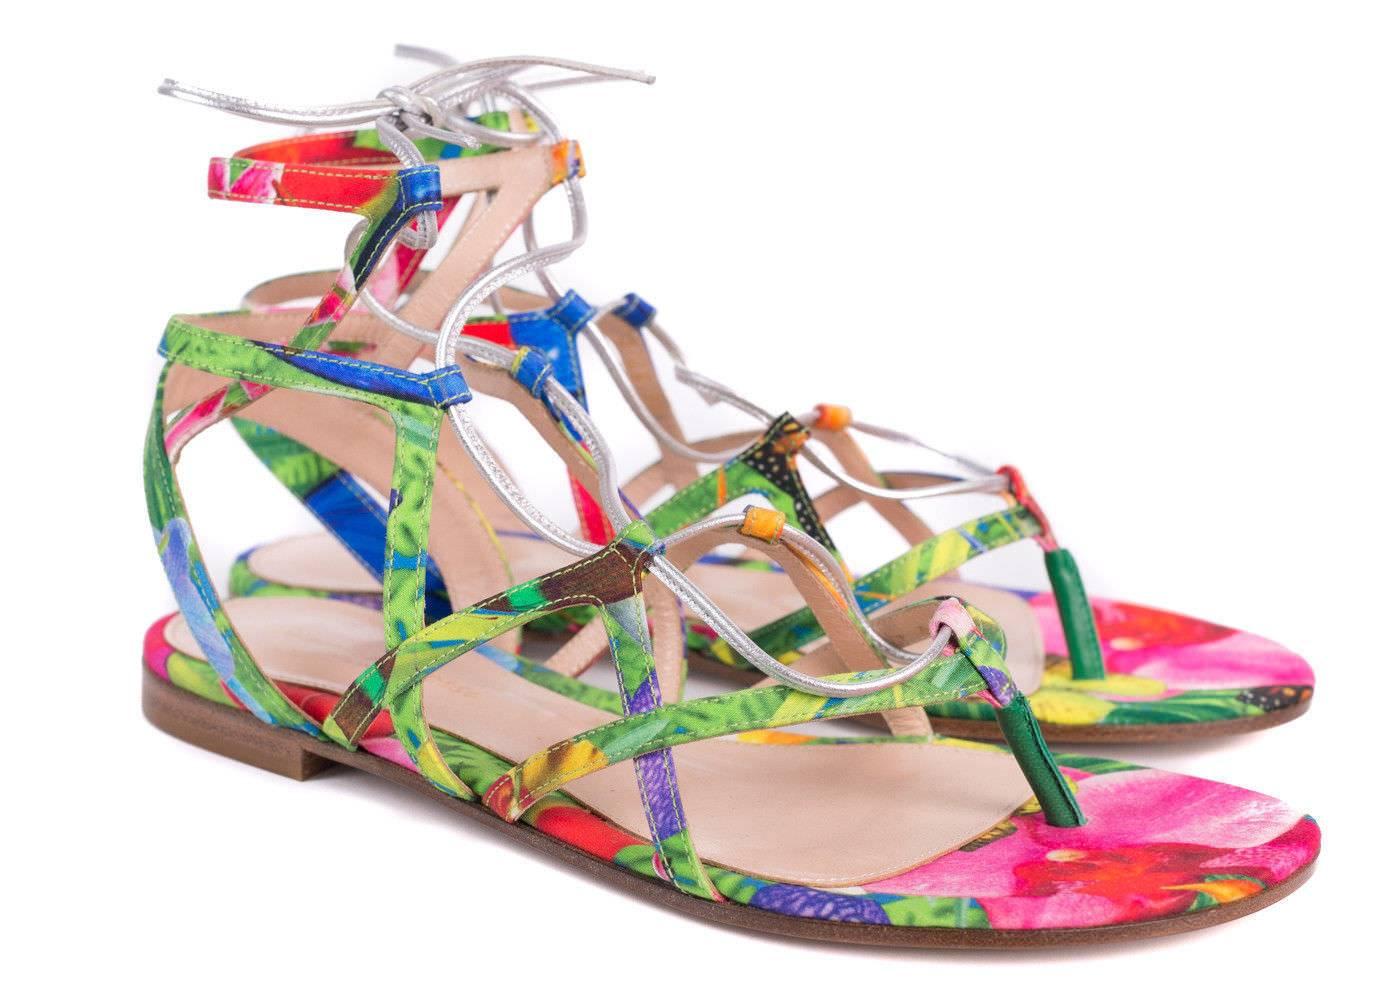 Parlay in the summer's haze with your Gianvitto Rossi floral sandals. These vibrant multicolored beauties feature a lightly futuristic metallic strap closure. You can pair these sandals with skinny white denim and a off-shoulder top for a sensual